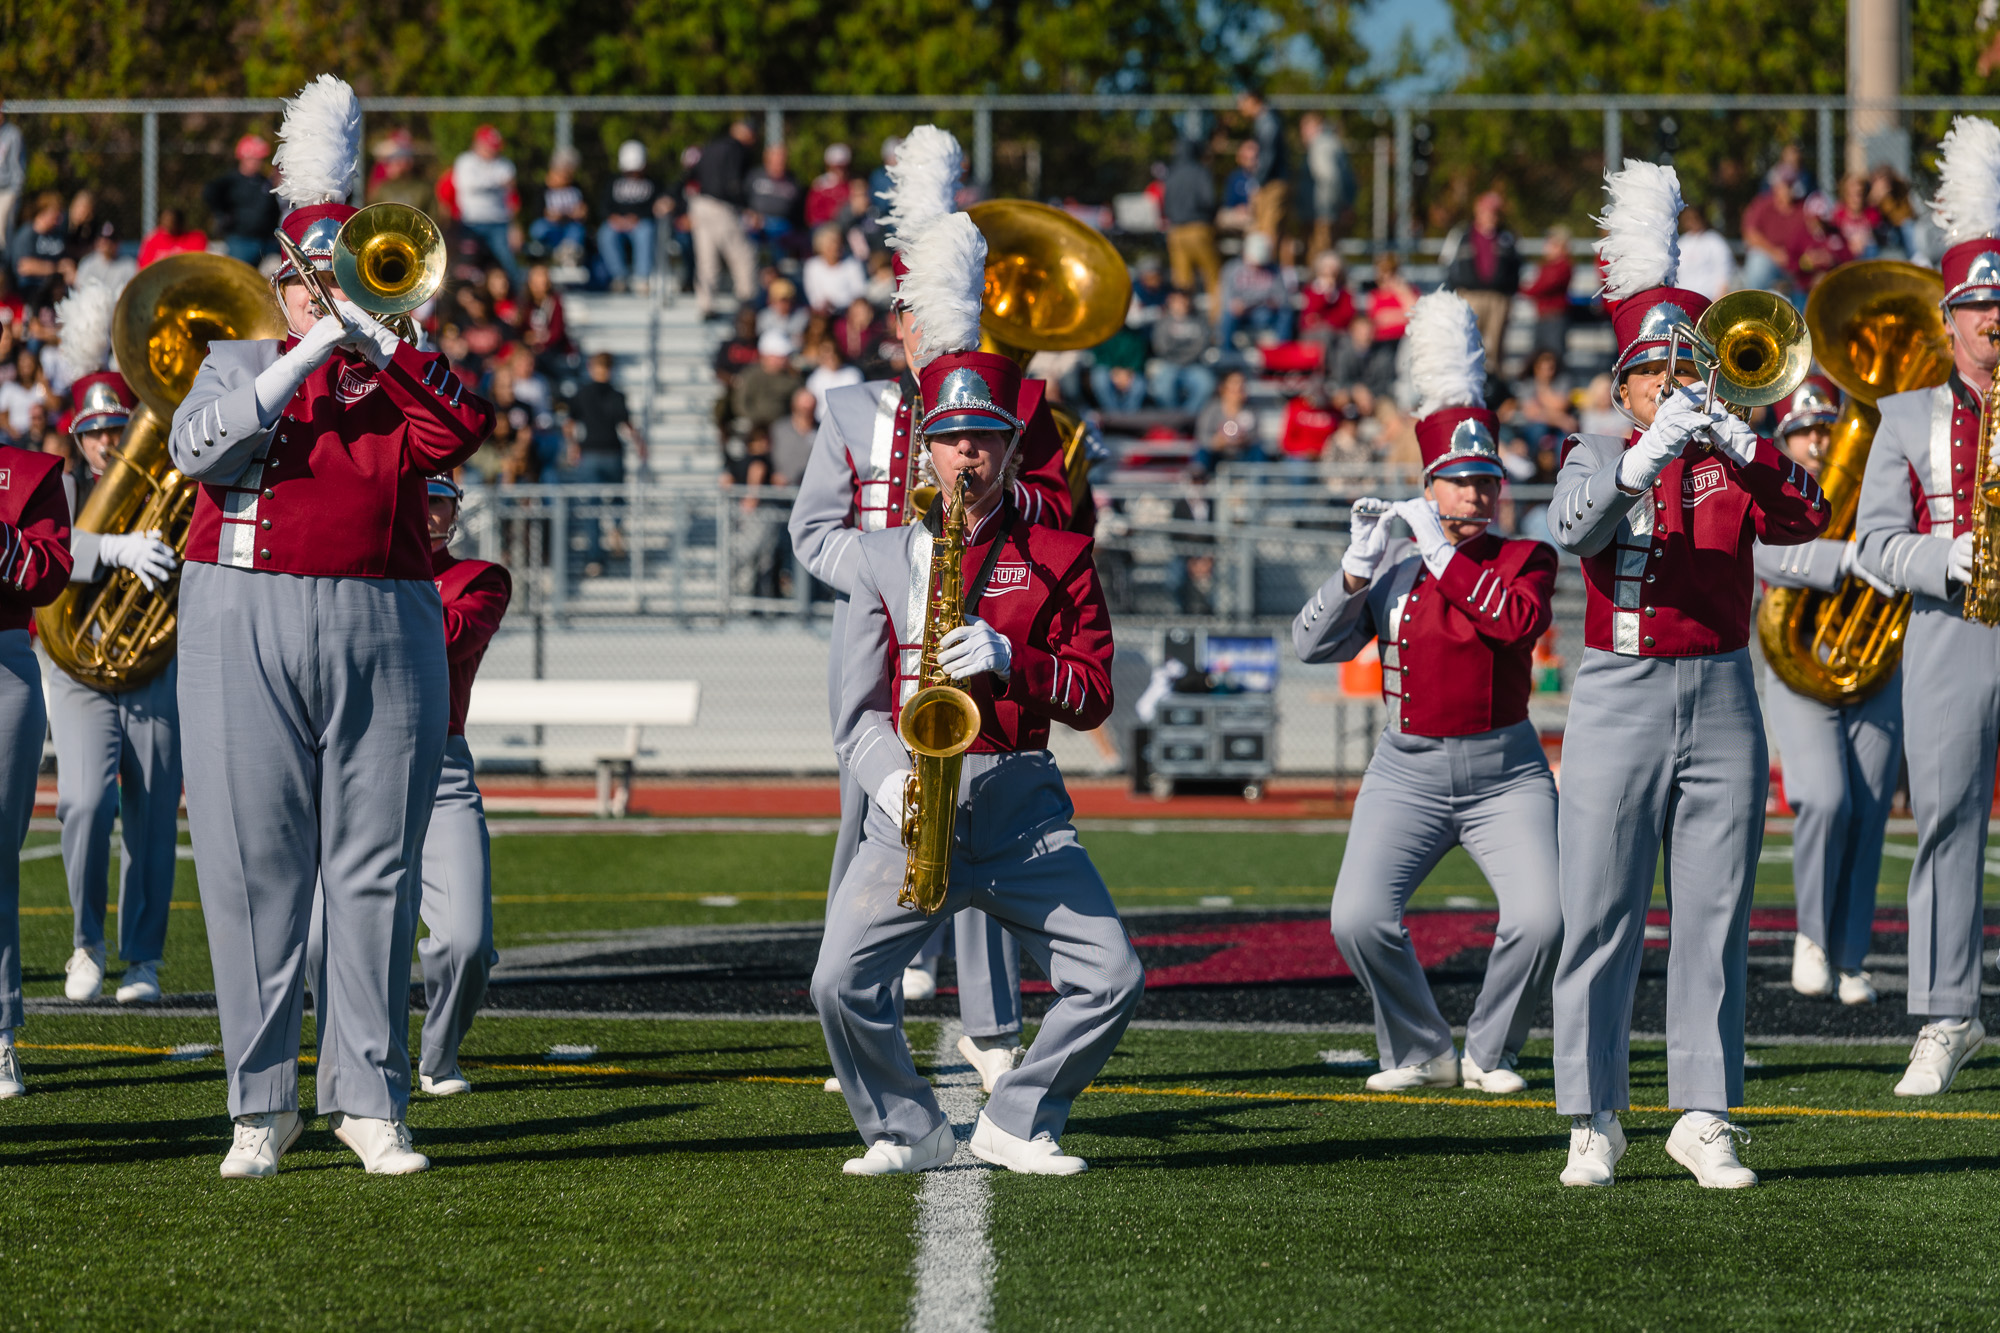 The band performs on the football field during halftime.